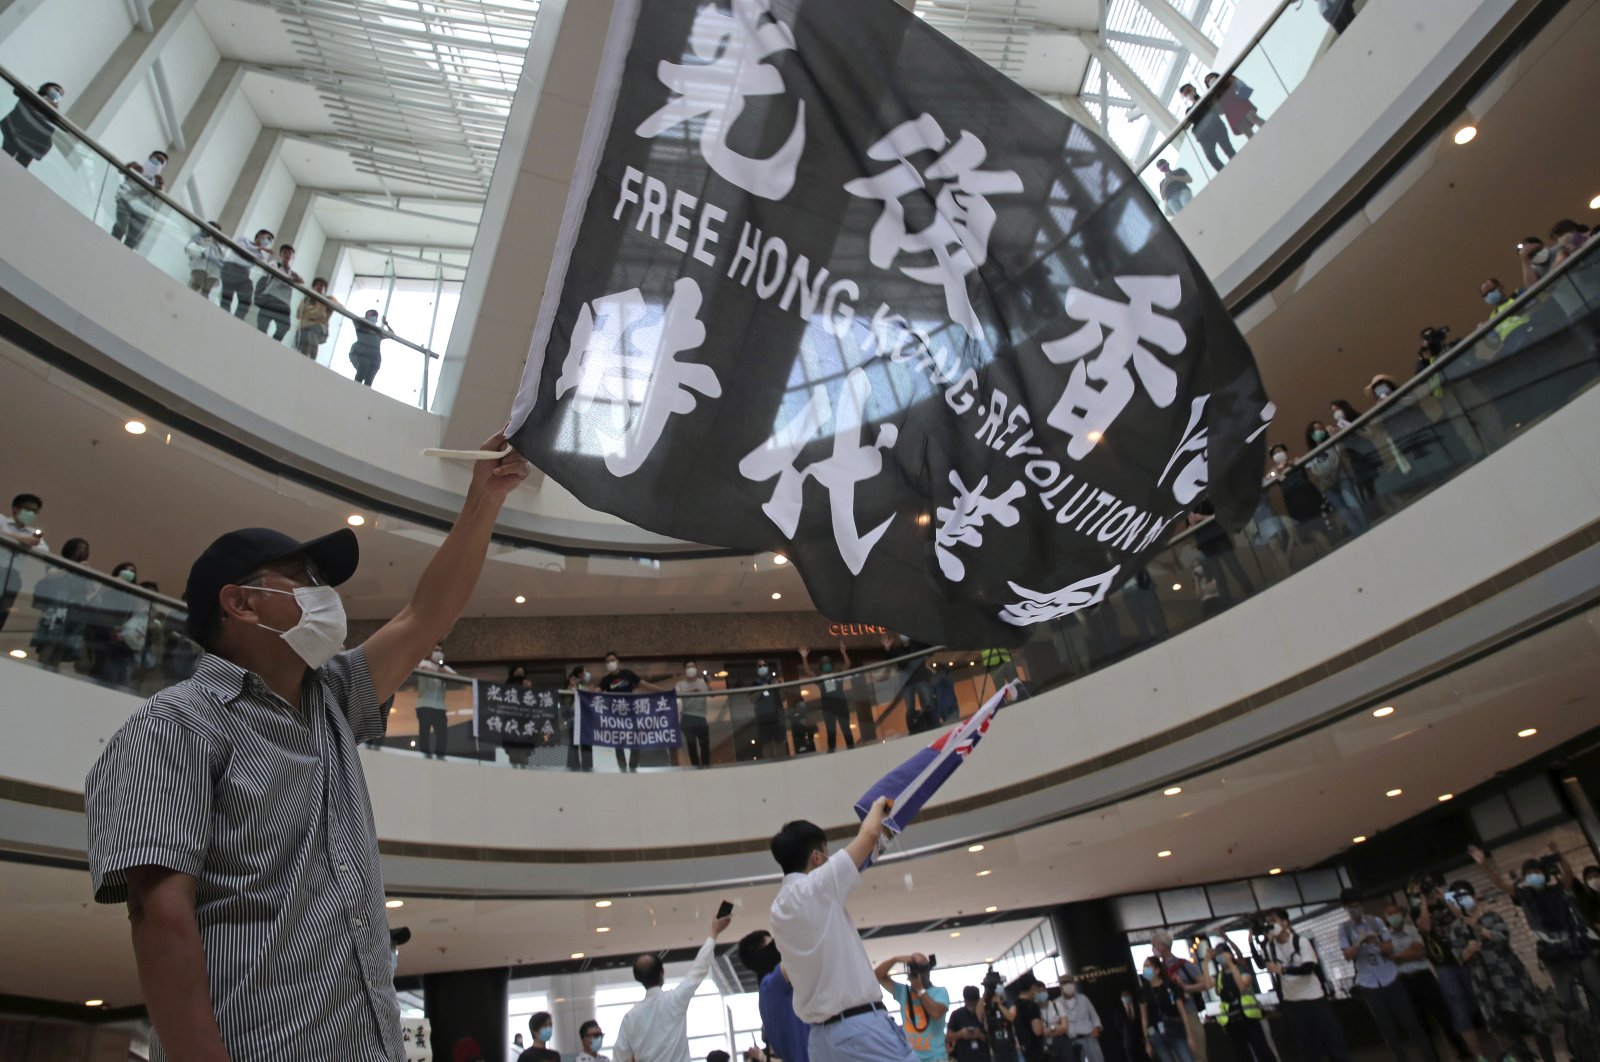 Protesters wave flags in a shopping mall during a protest against China's national security legislation for the city, in Hong Kong, Friday, May 29, 2020. (AP Photo)